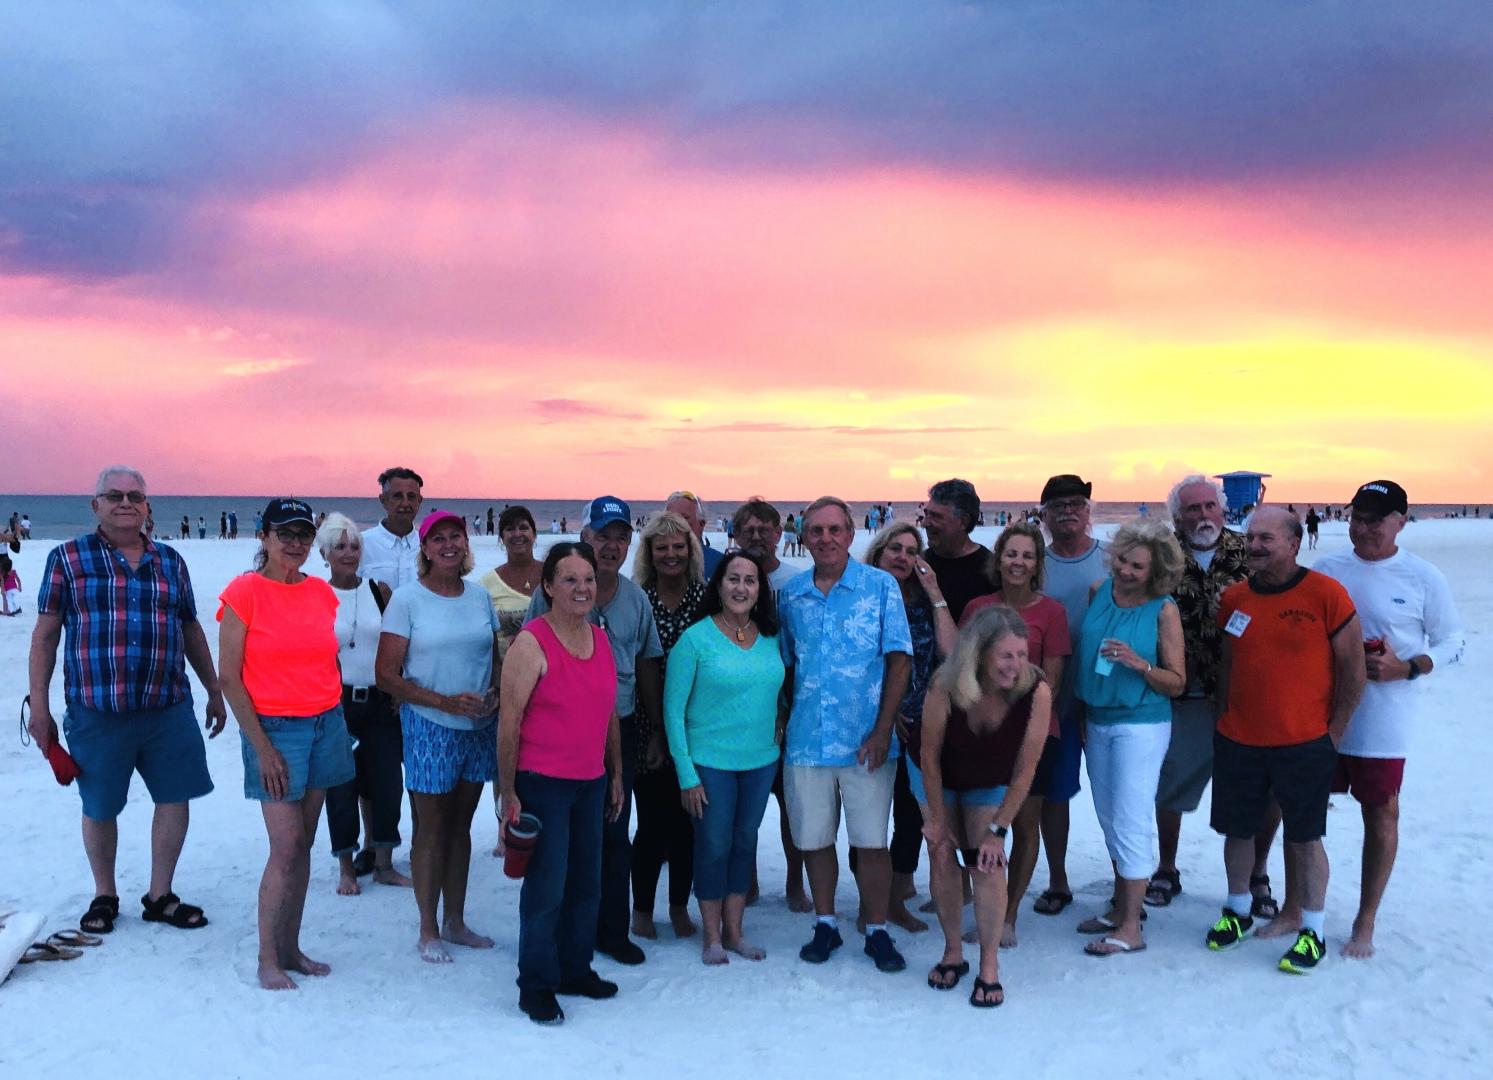 A beautiful sunset on Siesta Beach was the grand finale of our Reunion!